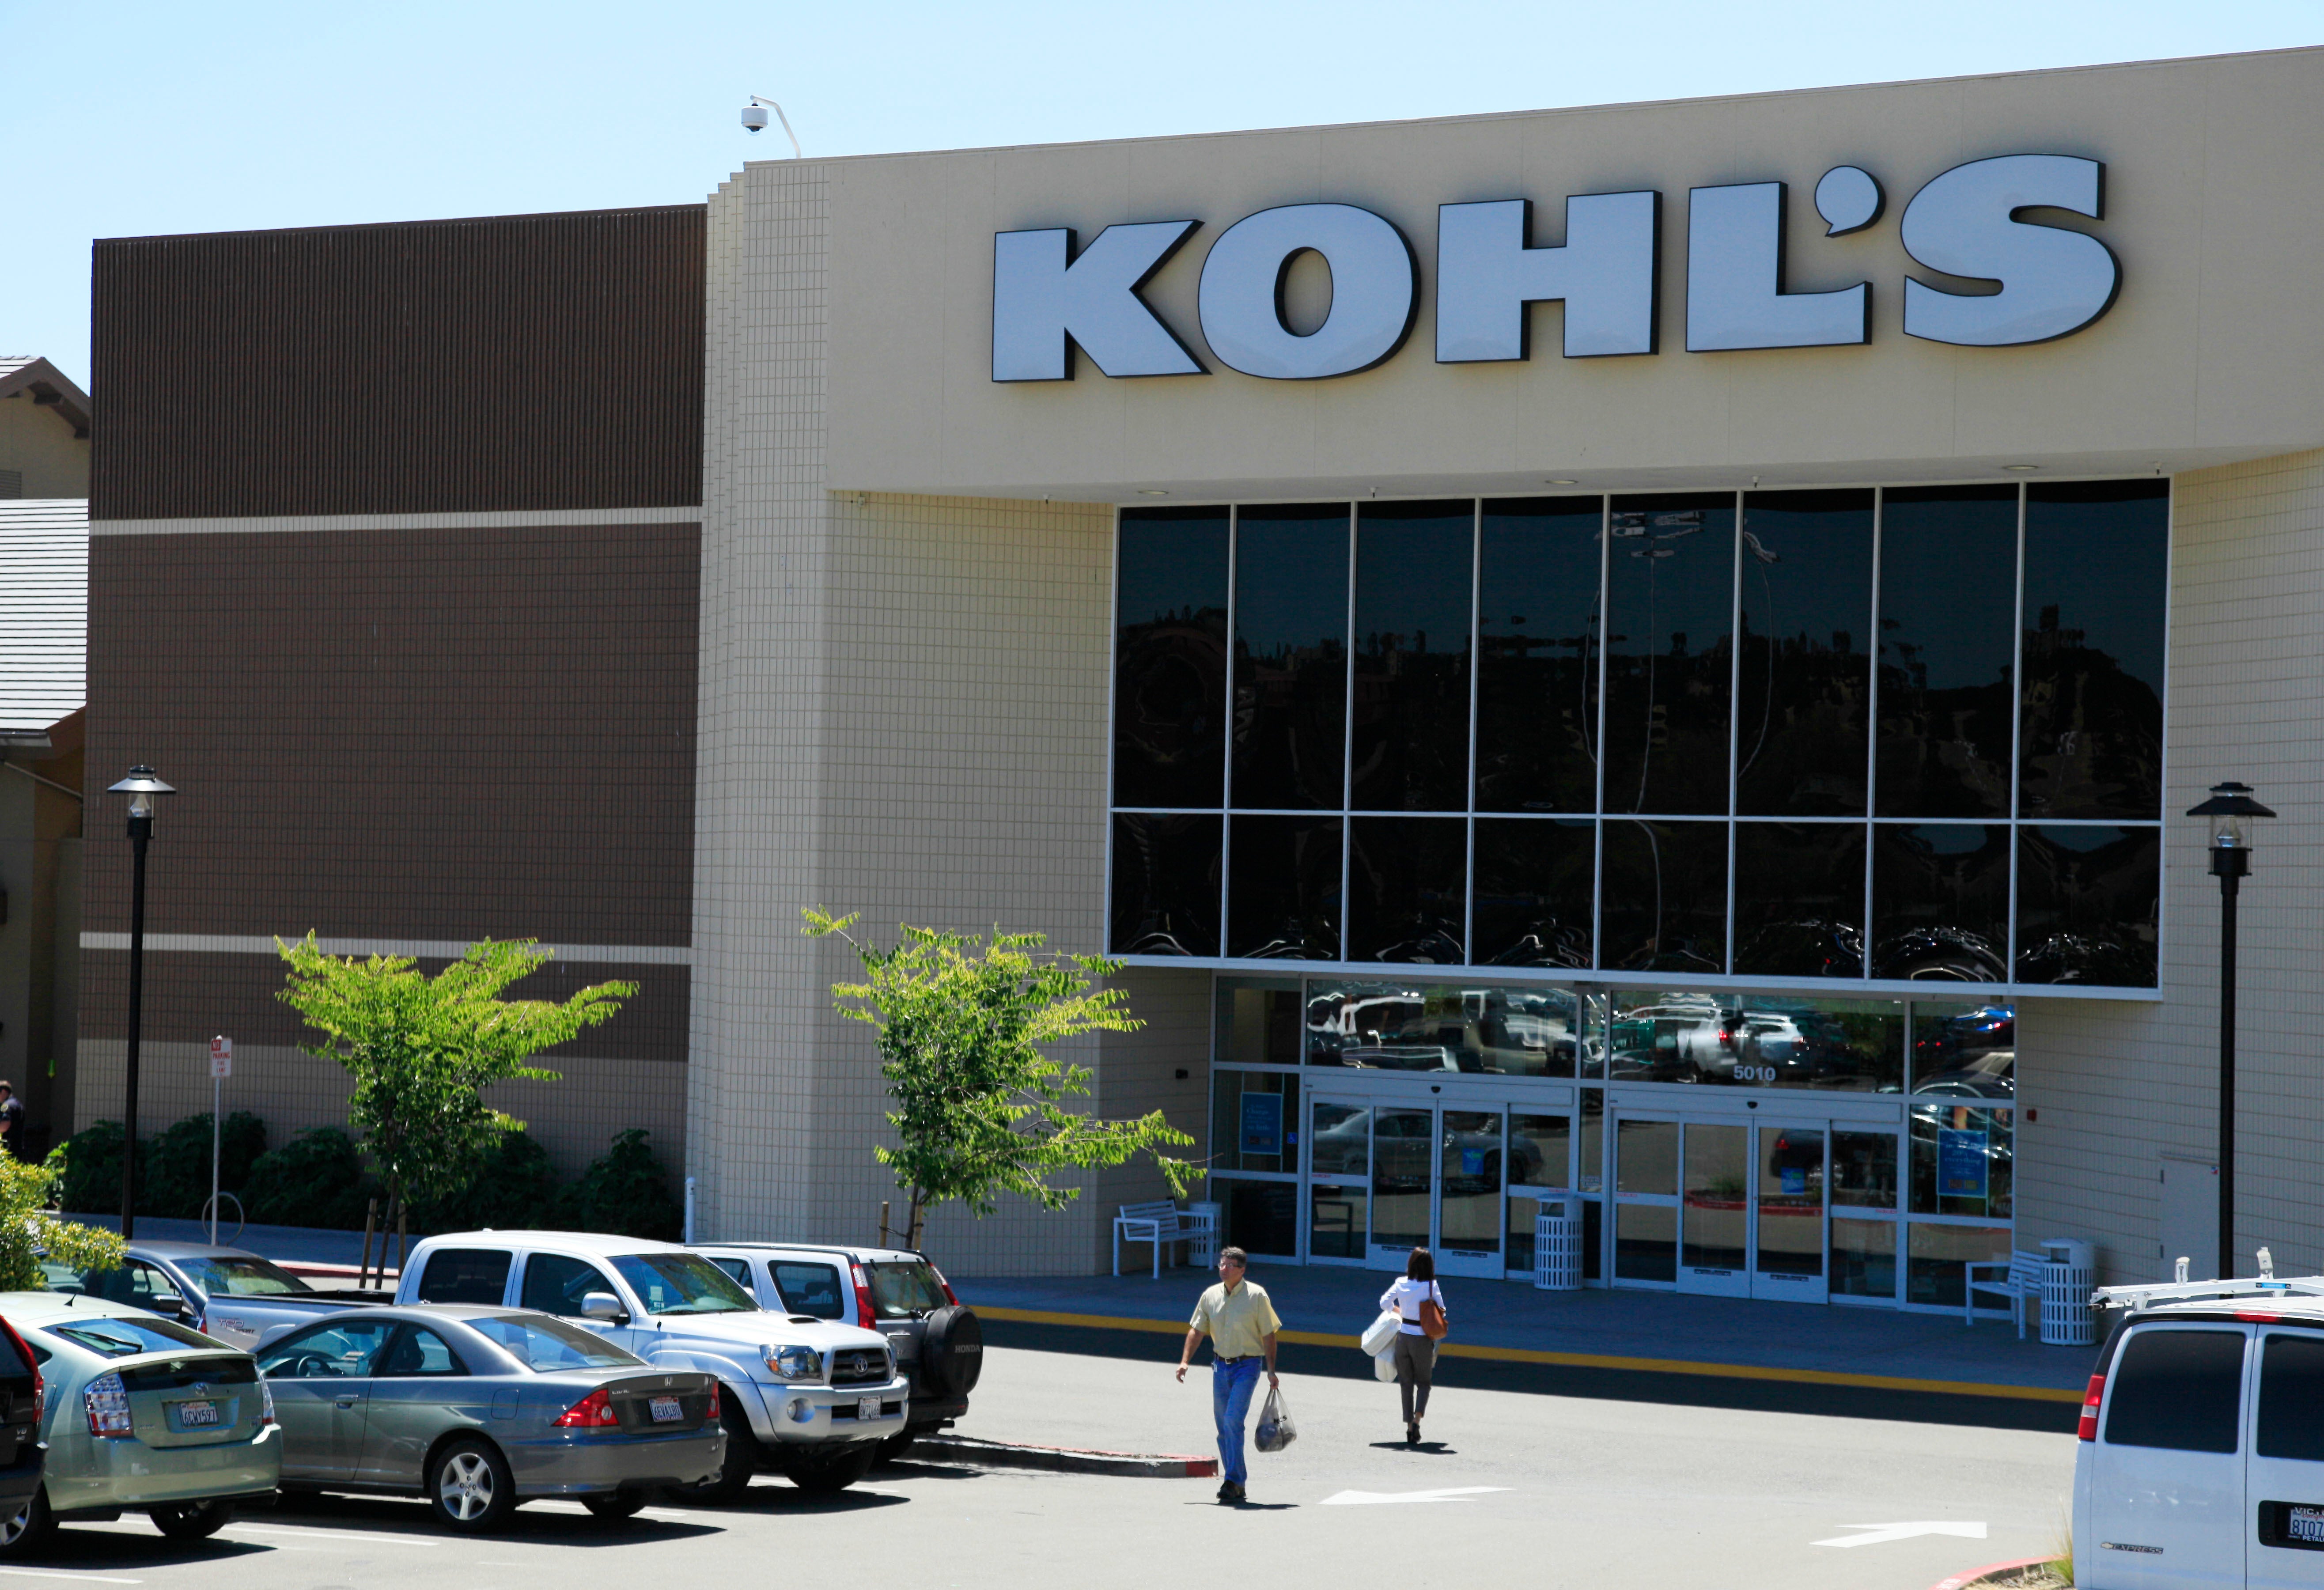 How to Make  Returns at Kohl's: Free Returns at All Stores